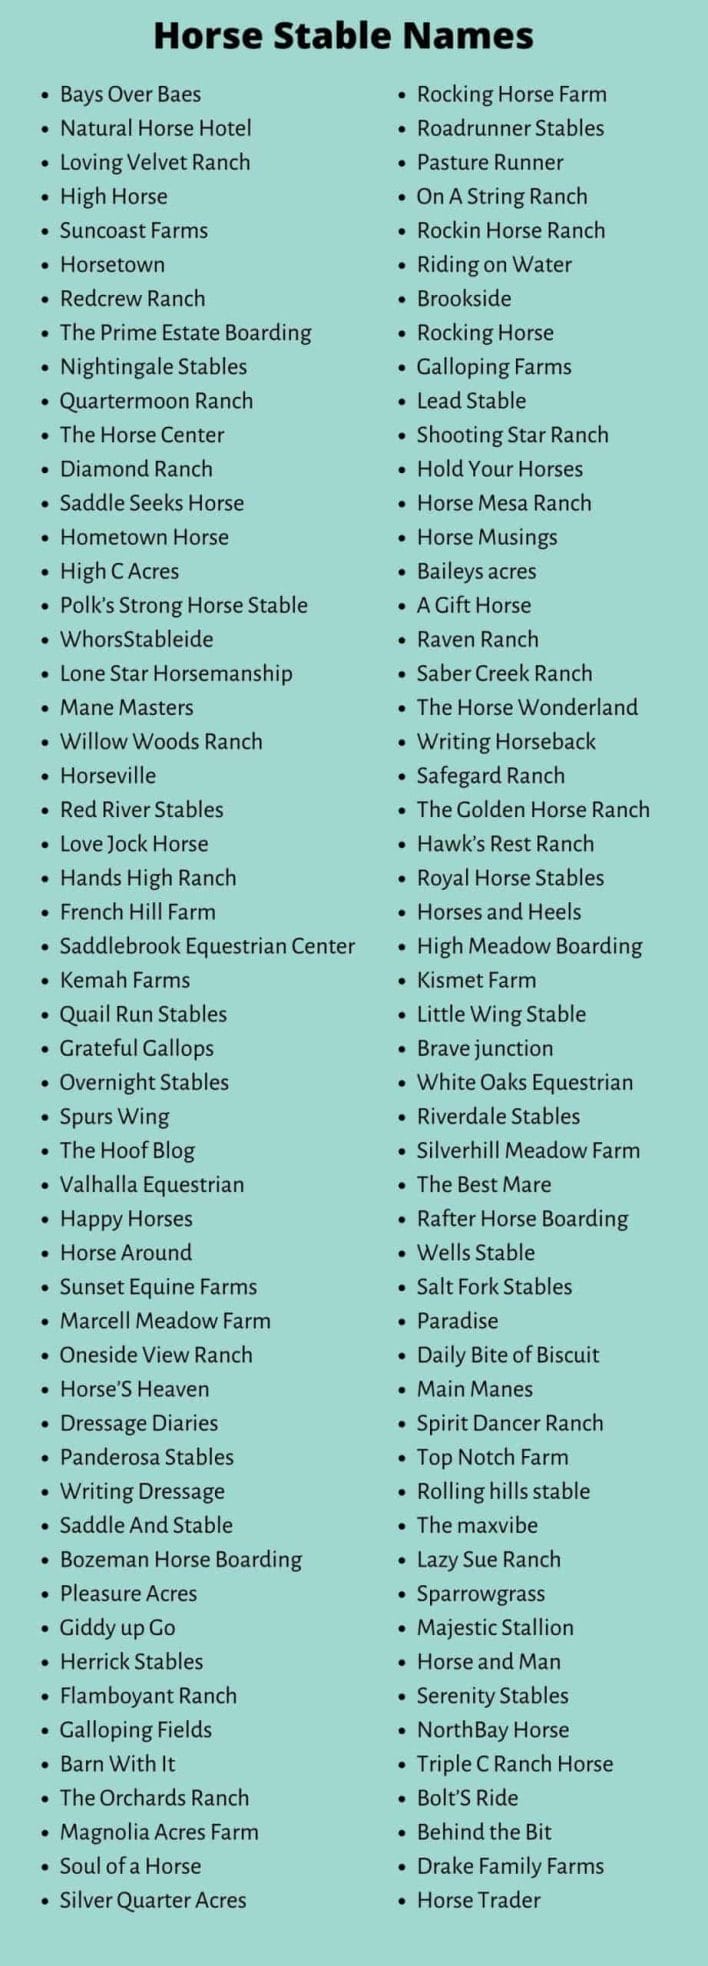 Horse Business Names